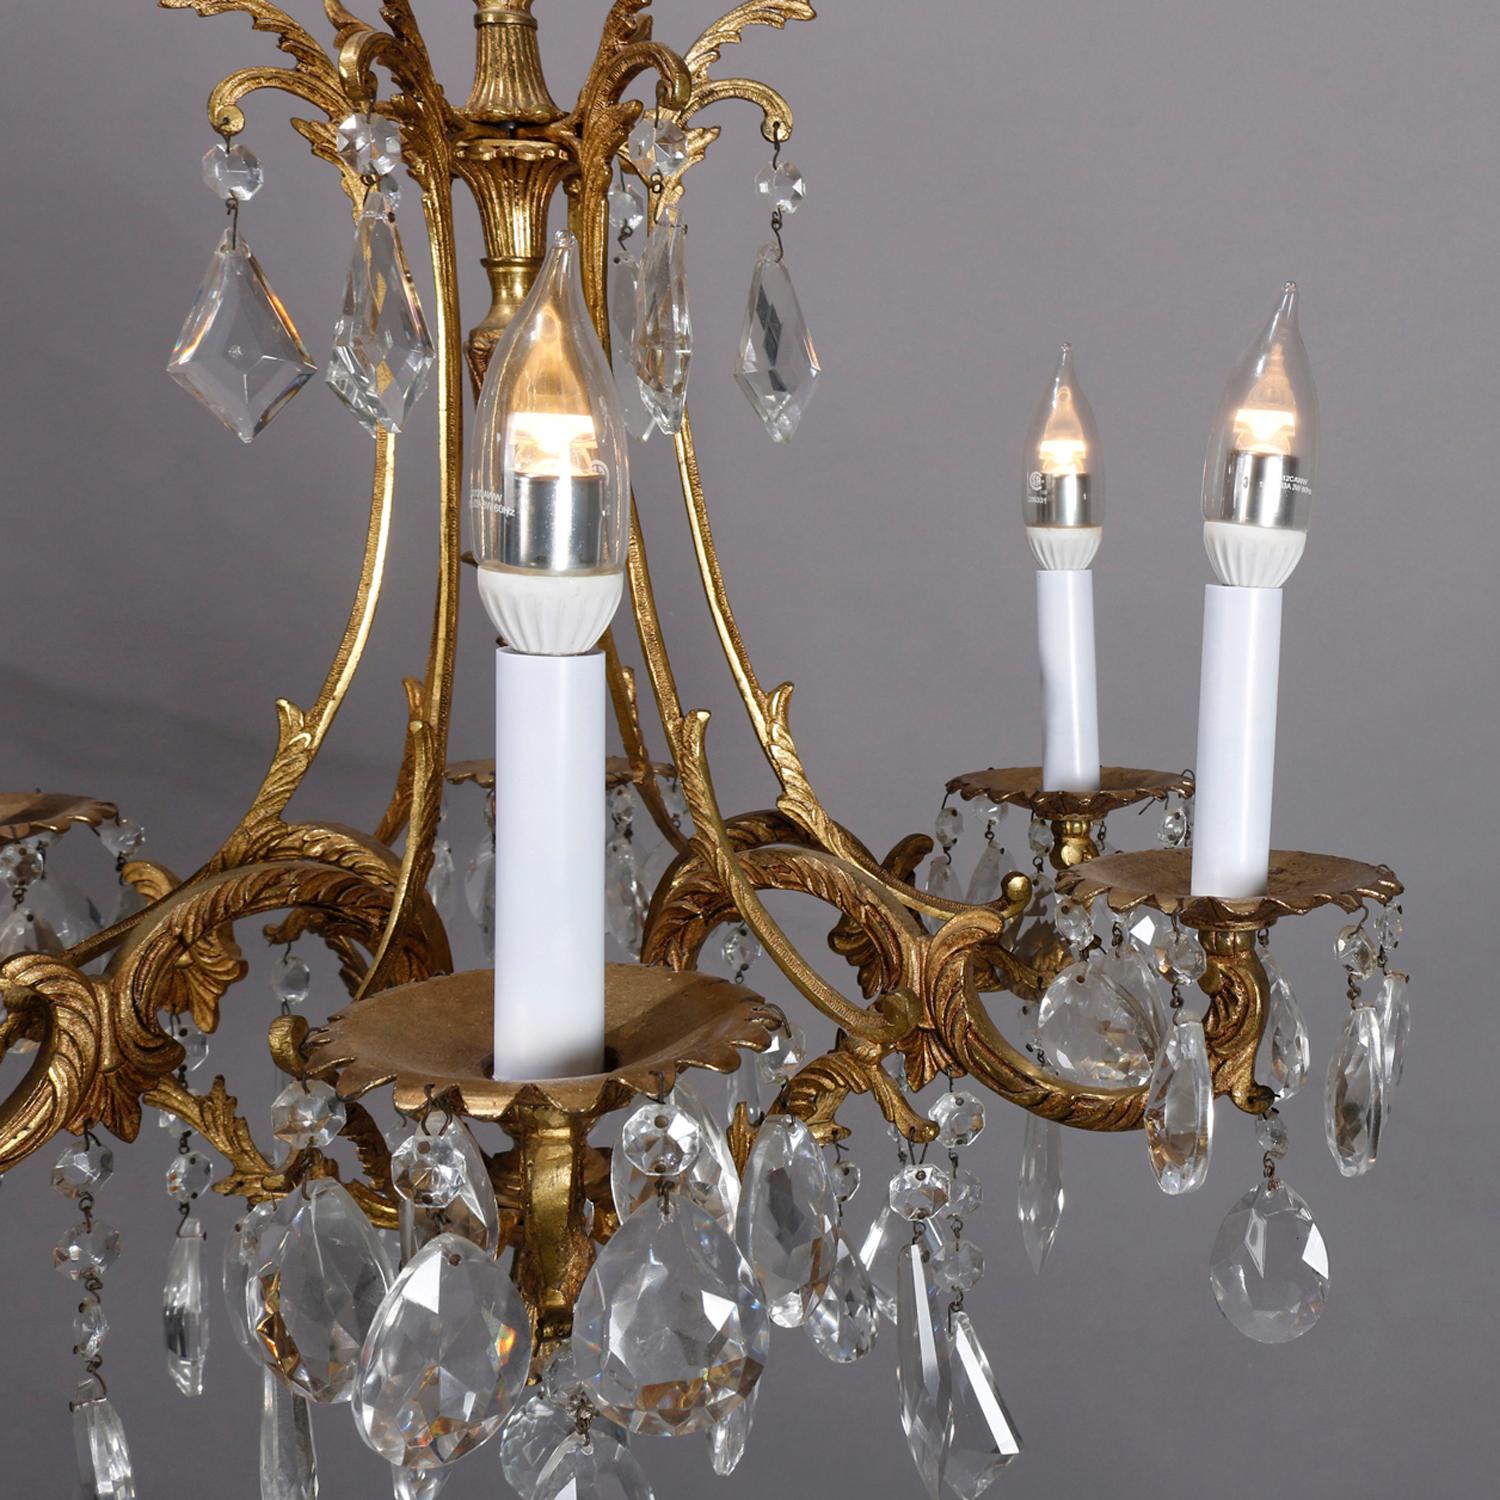 A French Louis XIV crystal chandelier offers gilt bronze foliate form frame with S-scroll arms terminating in candle lights, hanging cut crystal highlights throughout, 20th century

***DELIVERY NOTICE – Due to COVID-19 we are employing NO-CONTACT